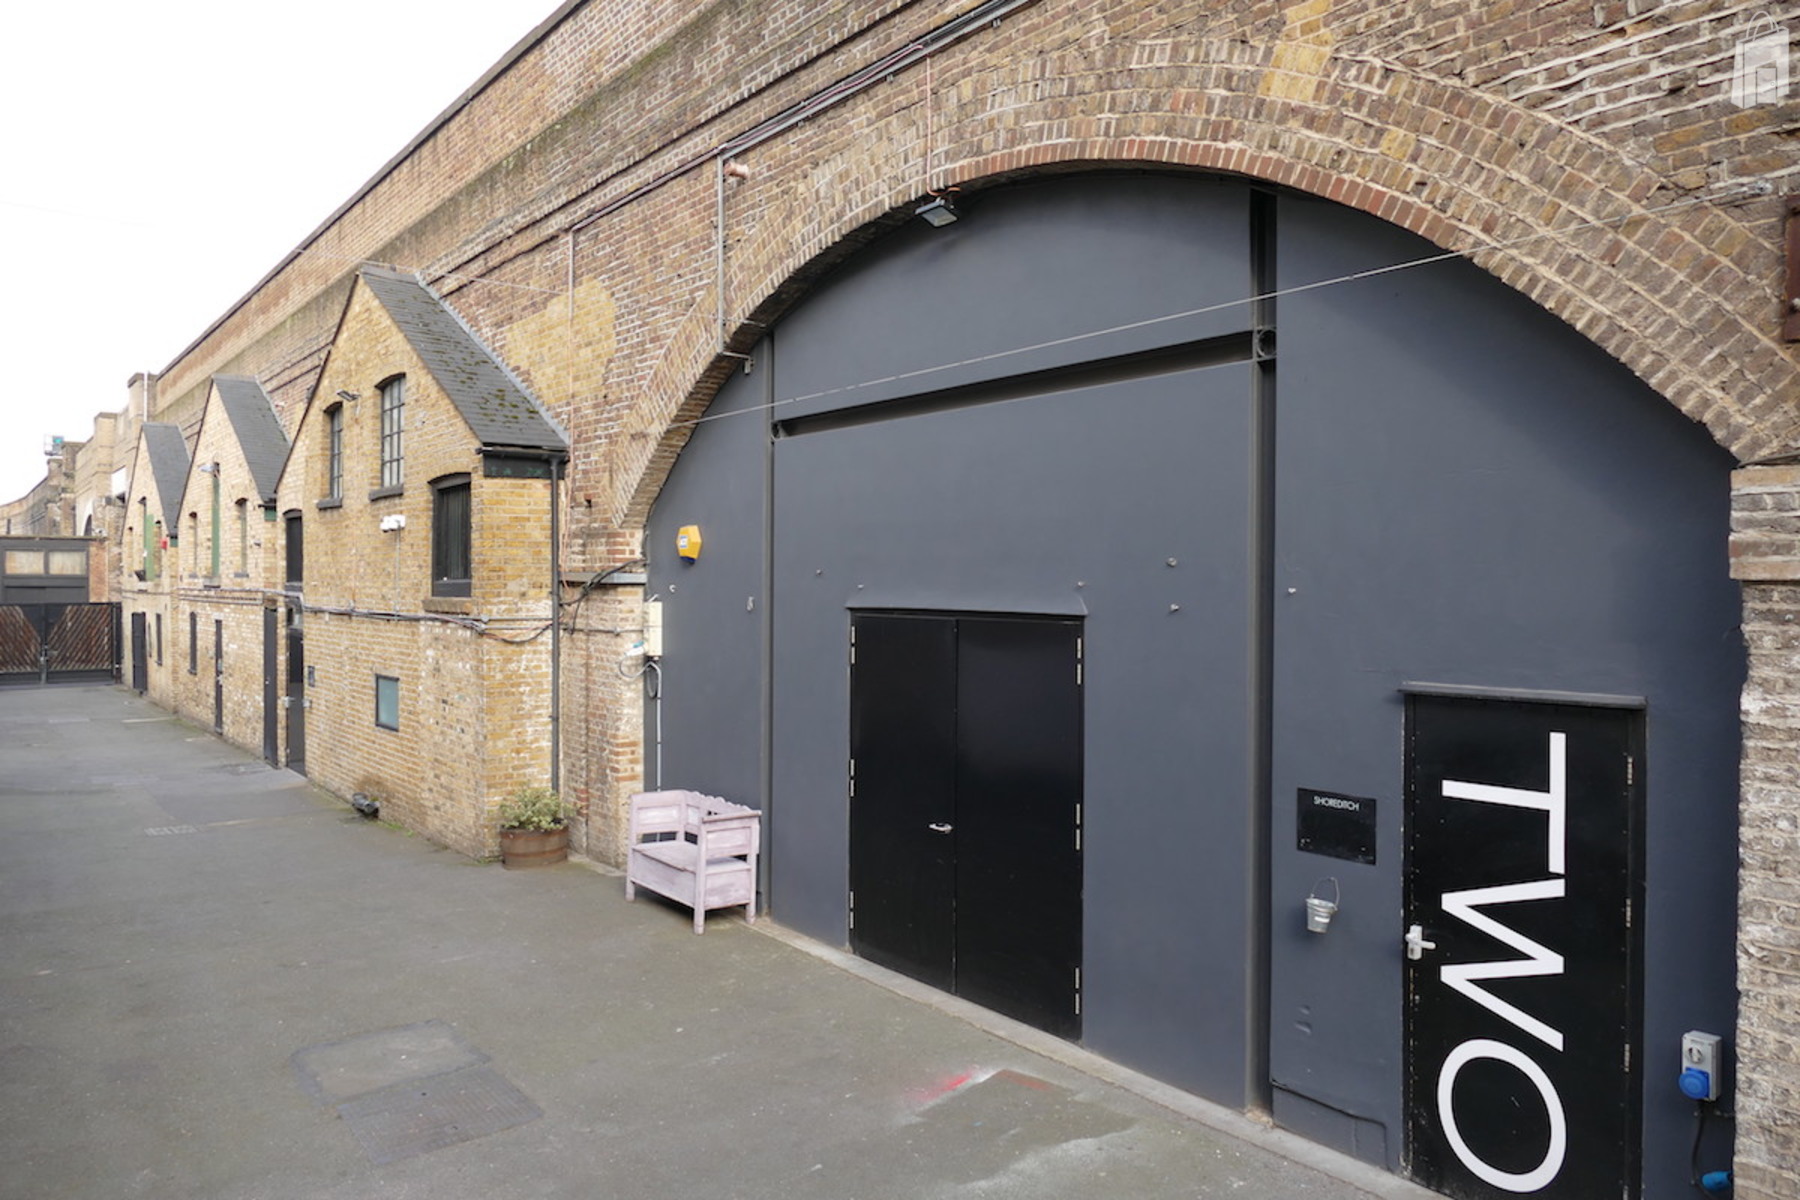 Shoreditch Studios large outdoor space